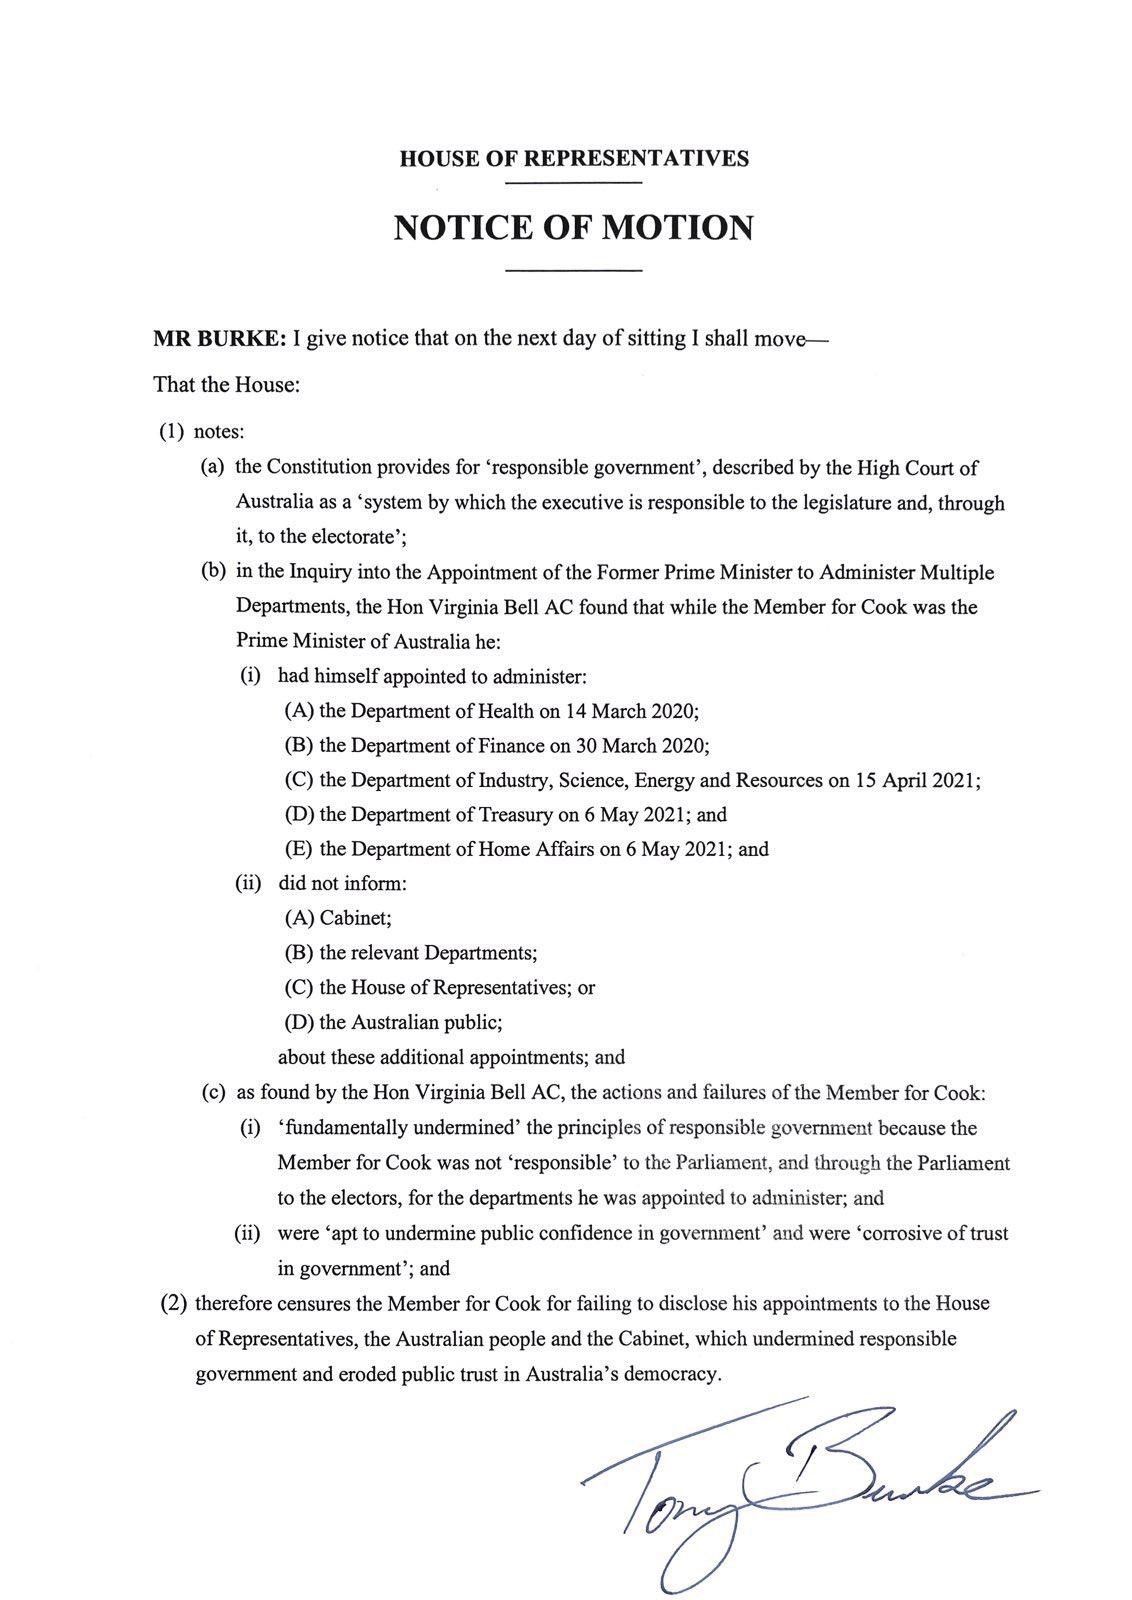 A document of the notice of motion to the House of Representatives